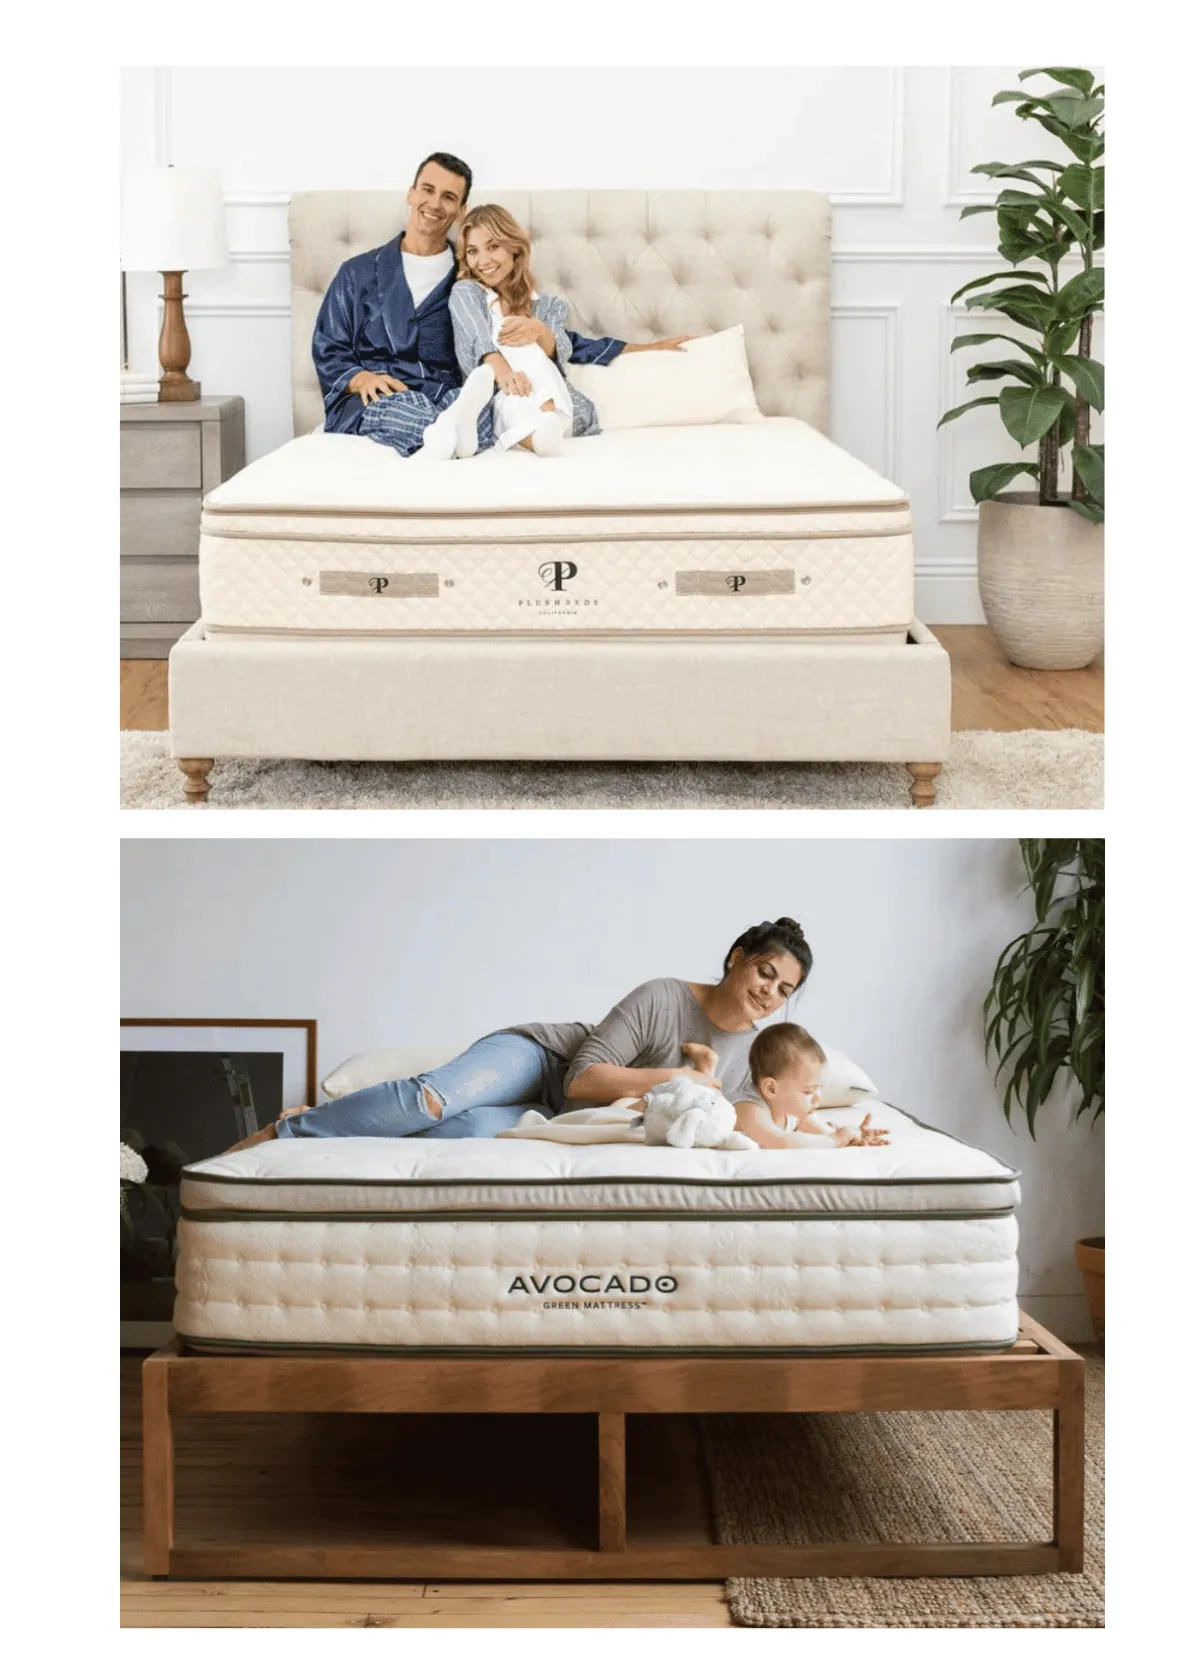 "How to Choose the Best Non-Toxic Mattress for Your Health"